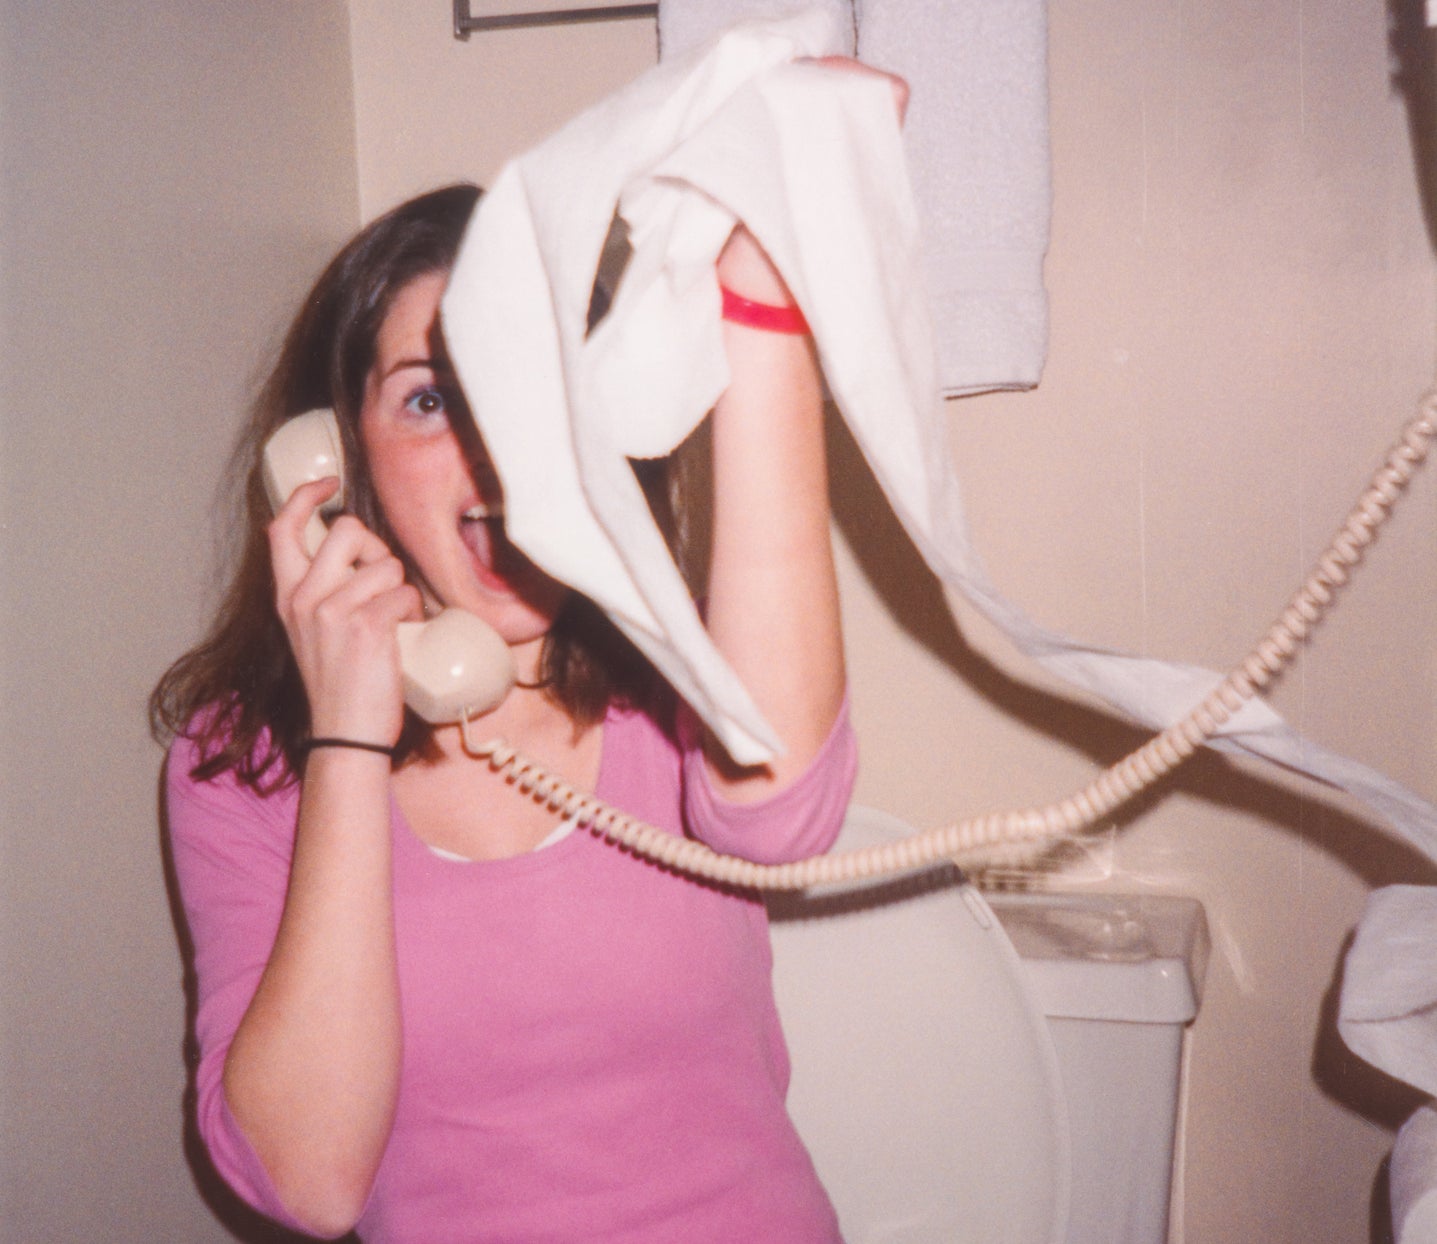 Woman on a corded phone making a face, caught off guard, with a towel in her hand, standing in a bathroom